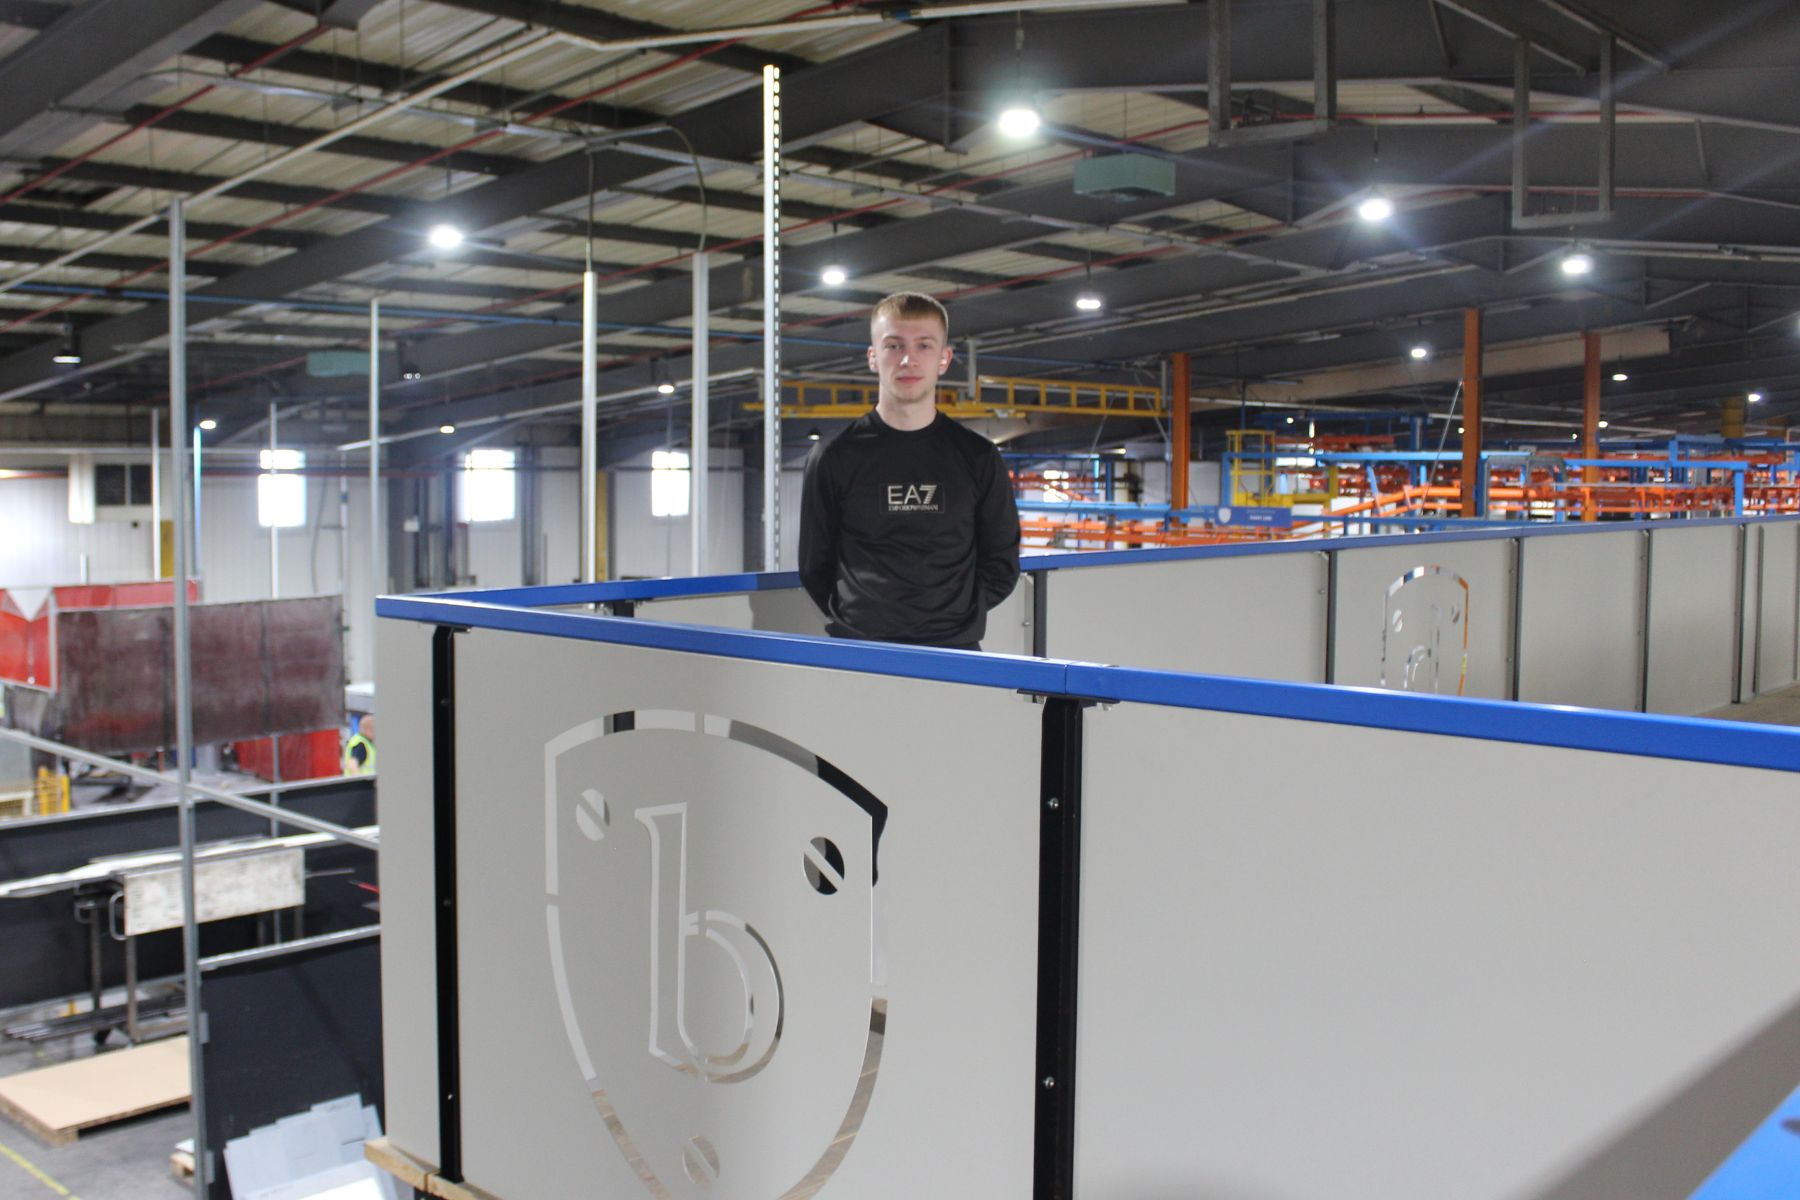 Local student completes work placement at Bradbury Group.